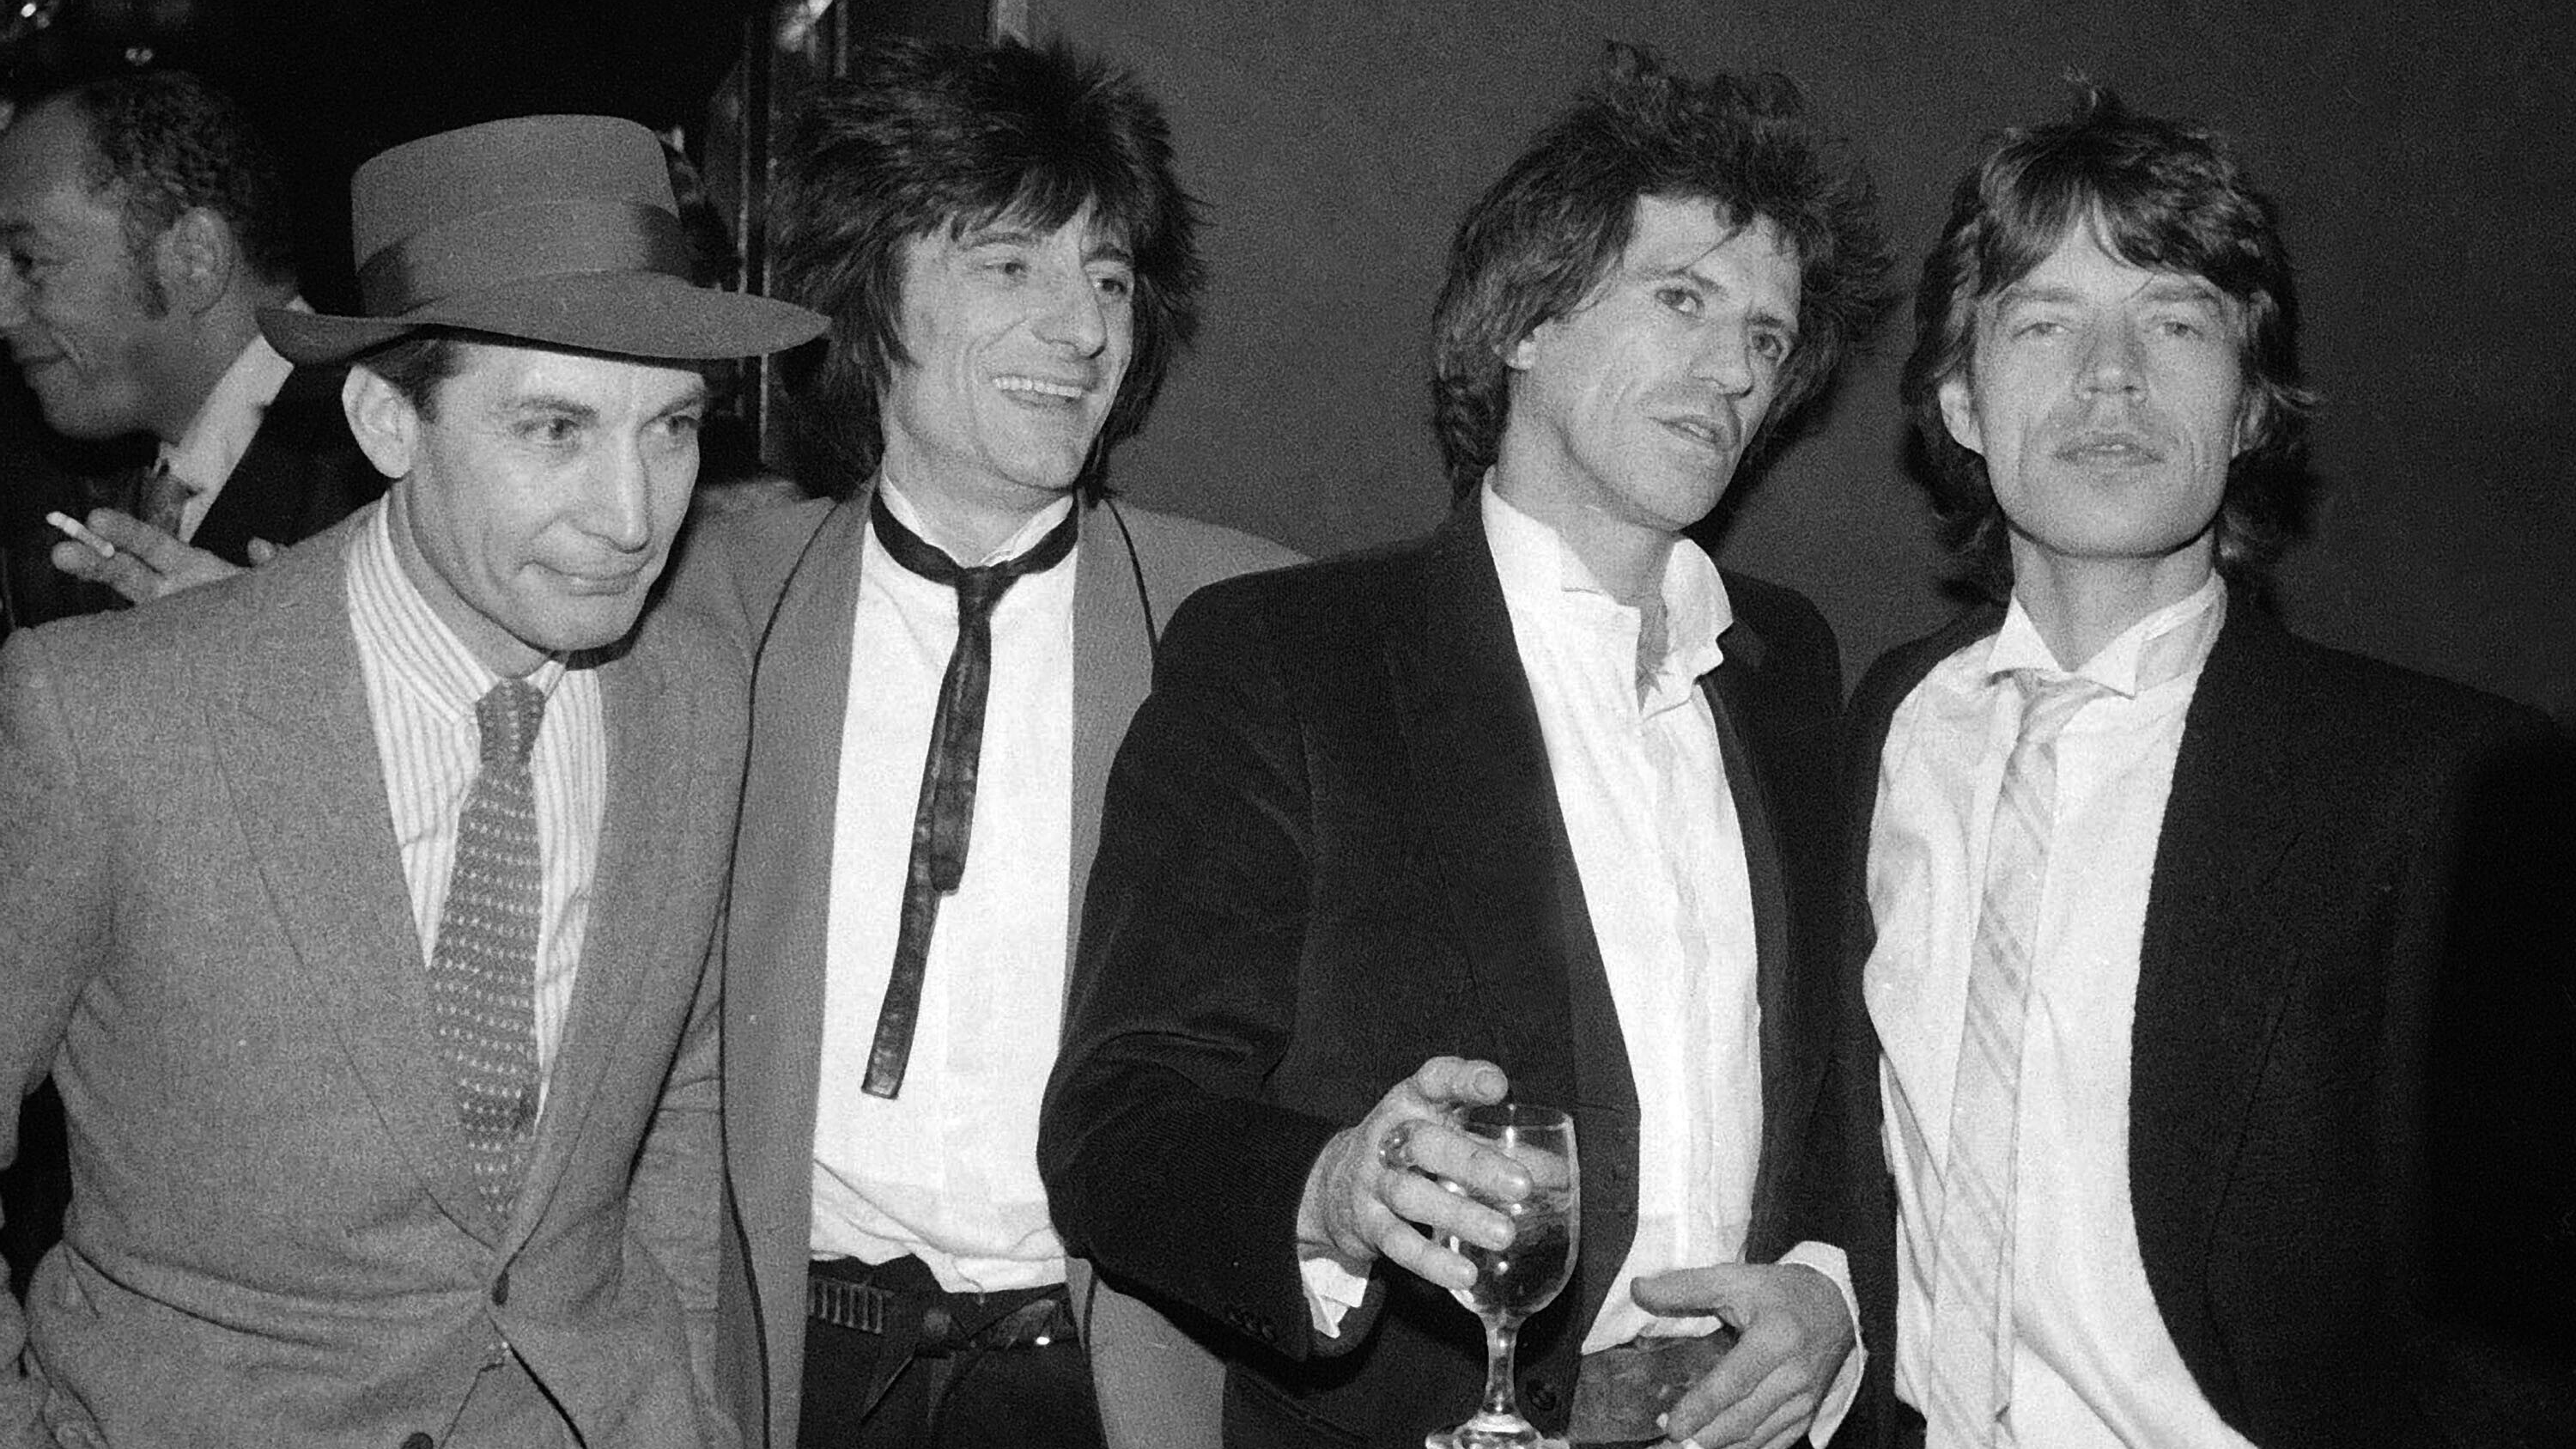 Members of the Rolling Stones, from left, Charlie Watts, Ron Wood, Keith Richards, and Mick Jagger appear at a party celebrating the opening of their film "Let's Spend The Night Together," in New York on Jan. 18, 1983. 